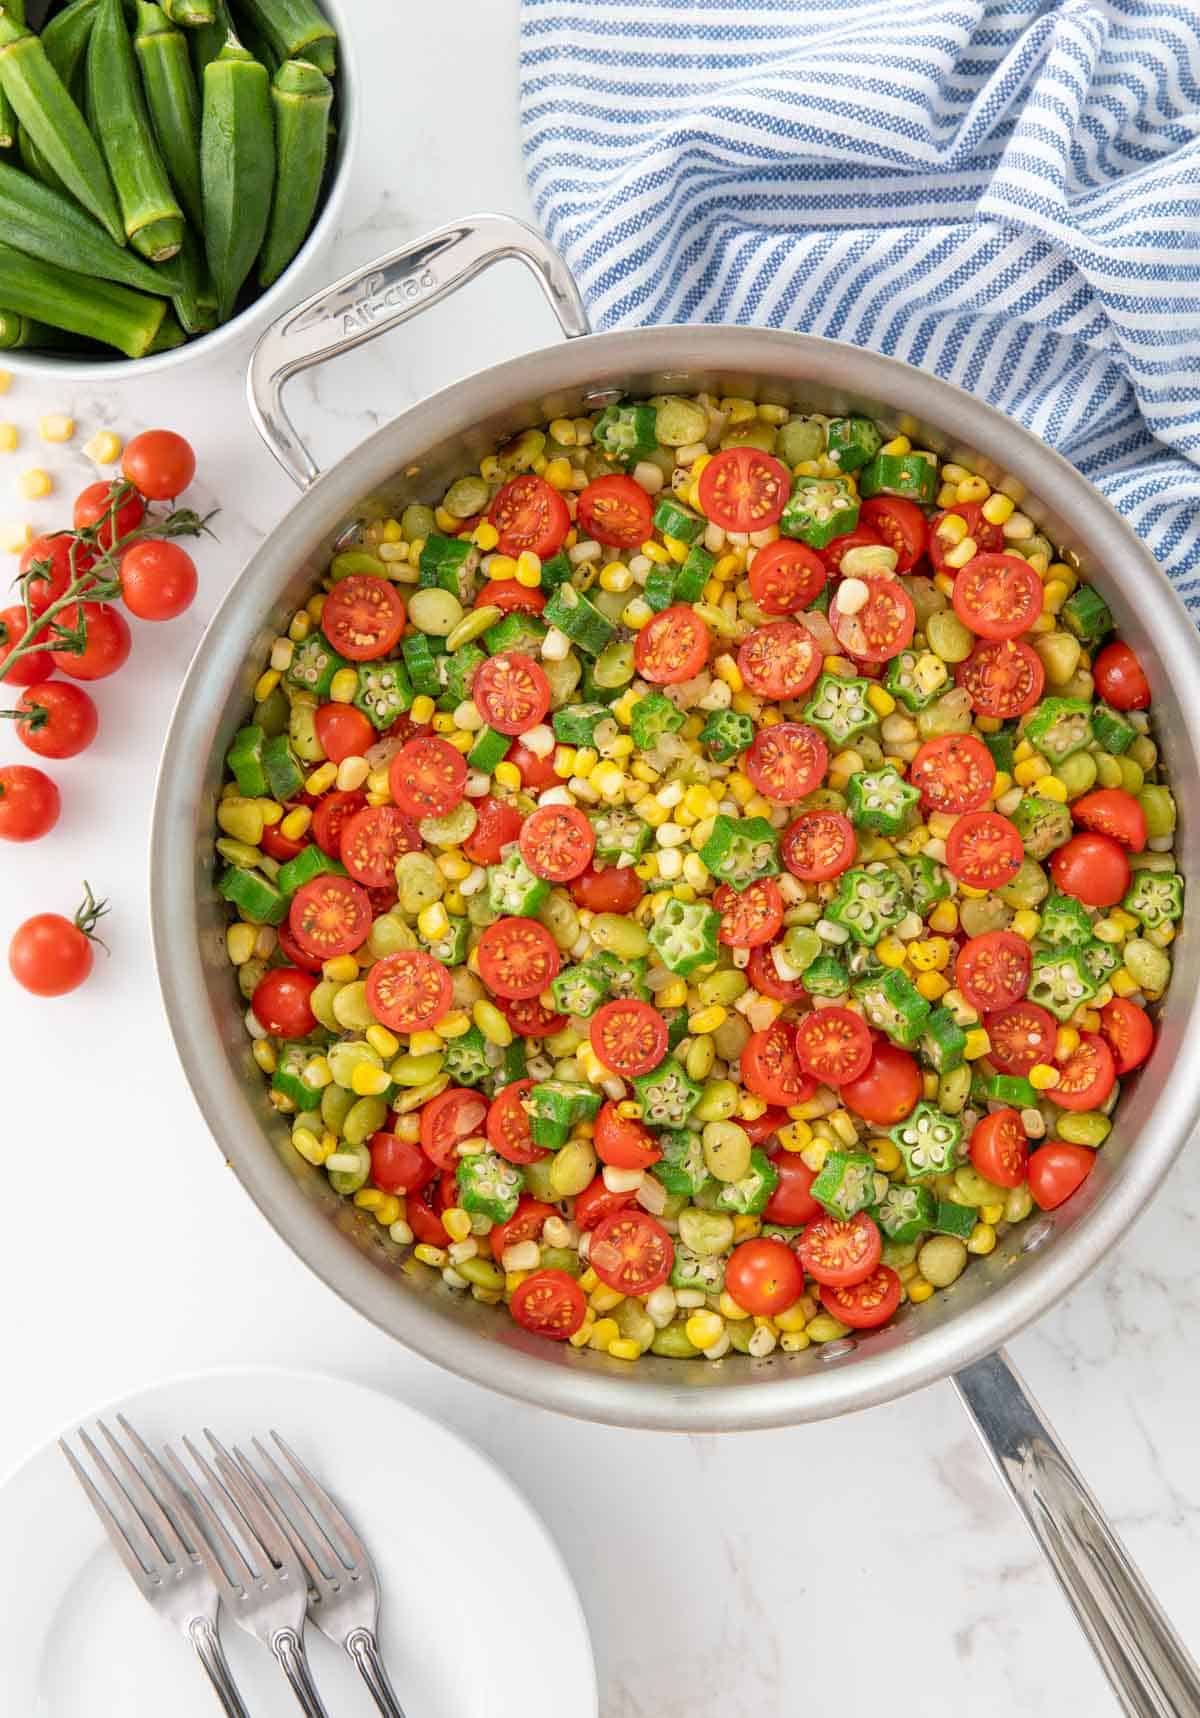 Overhead view of summer succotash in a saute pan by a blue striped kitchen towel.